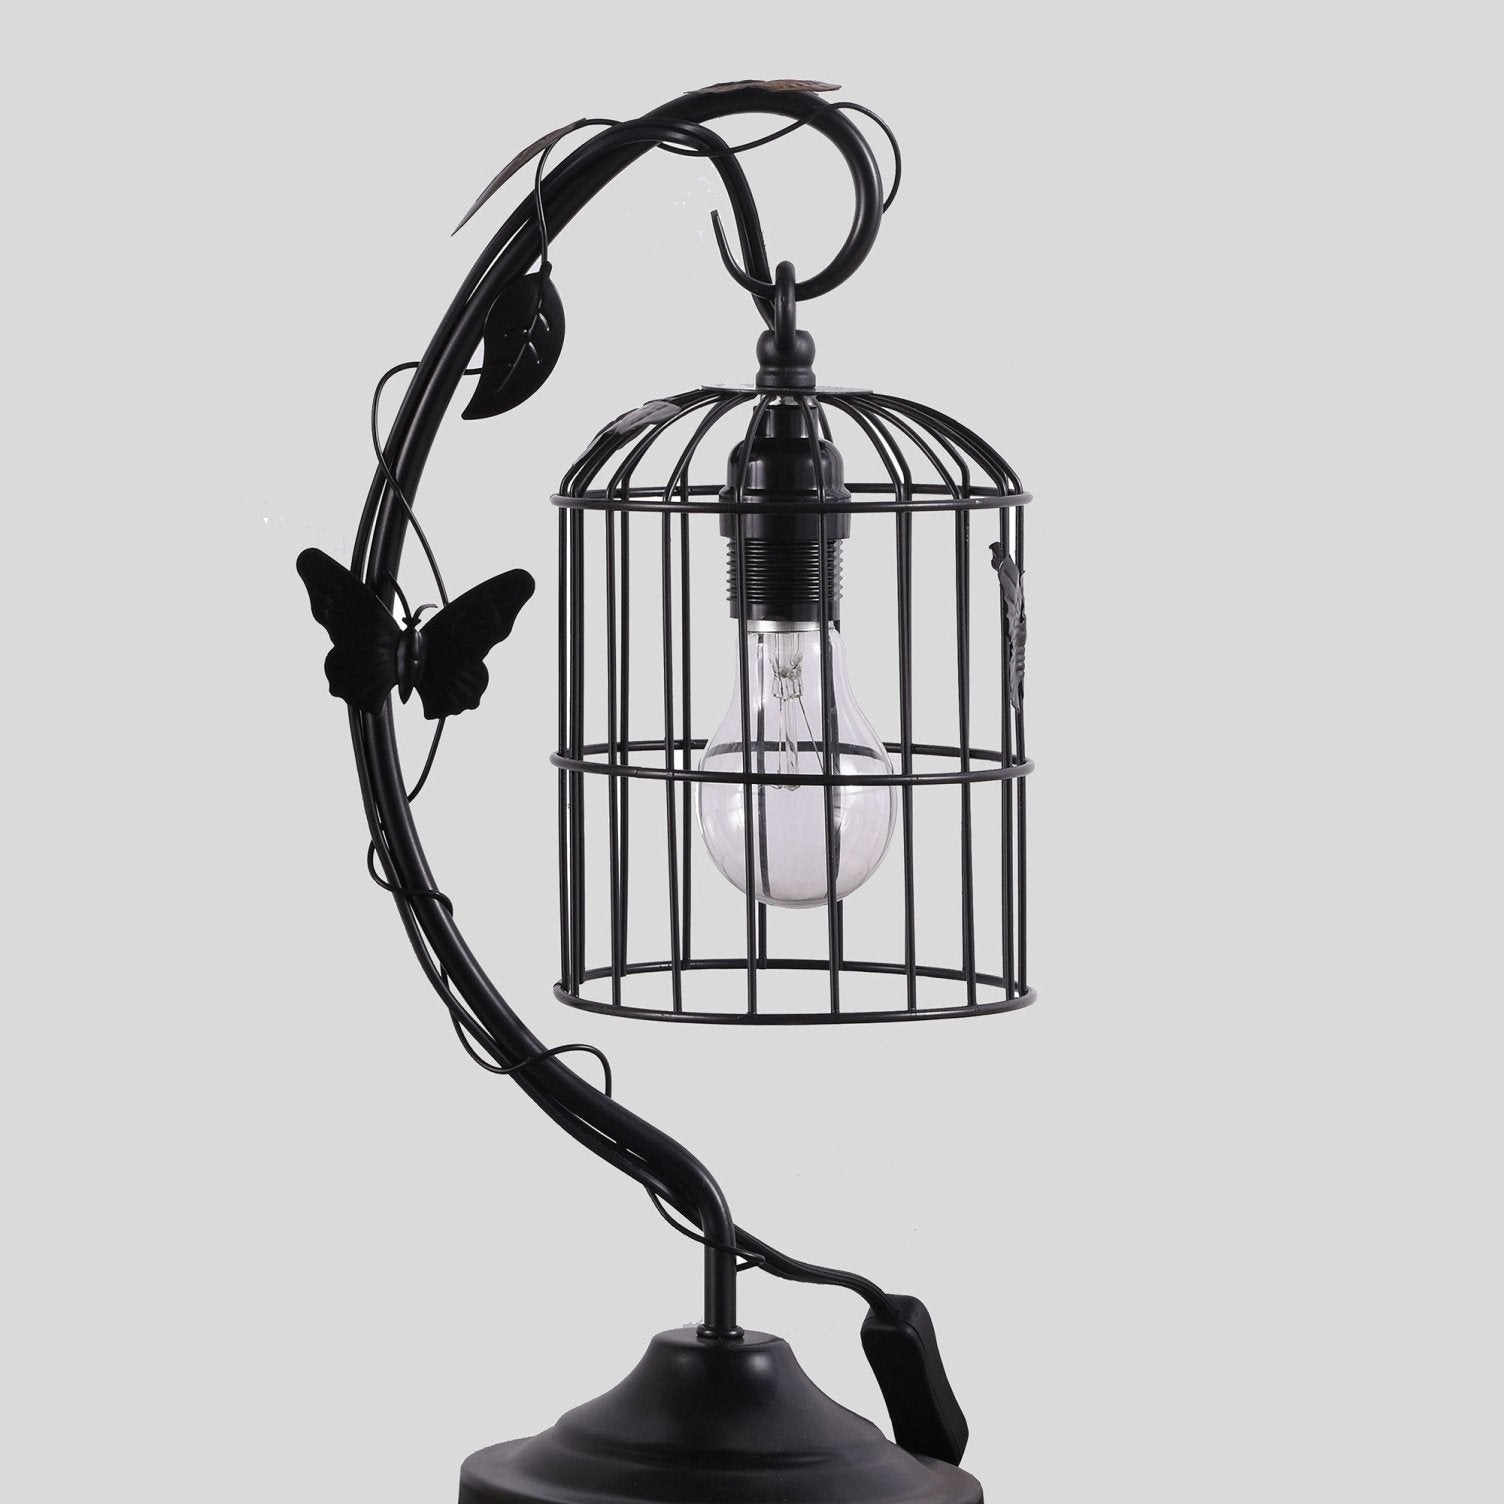 18" Black Bedside Table Lamp With Black Cage Shade - Tuesday Morning-Table Lamps